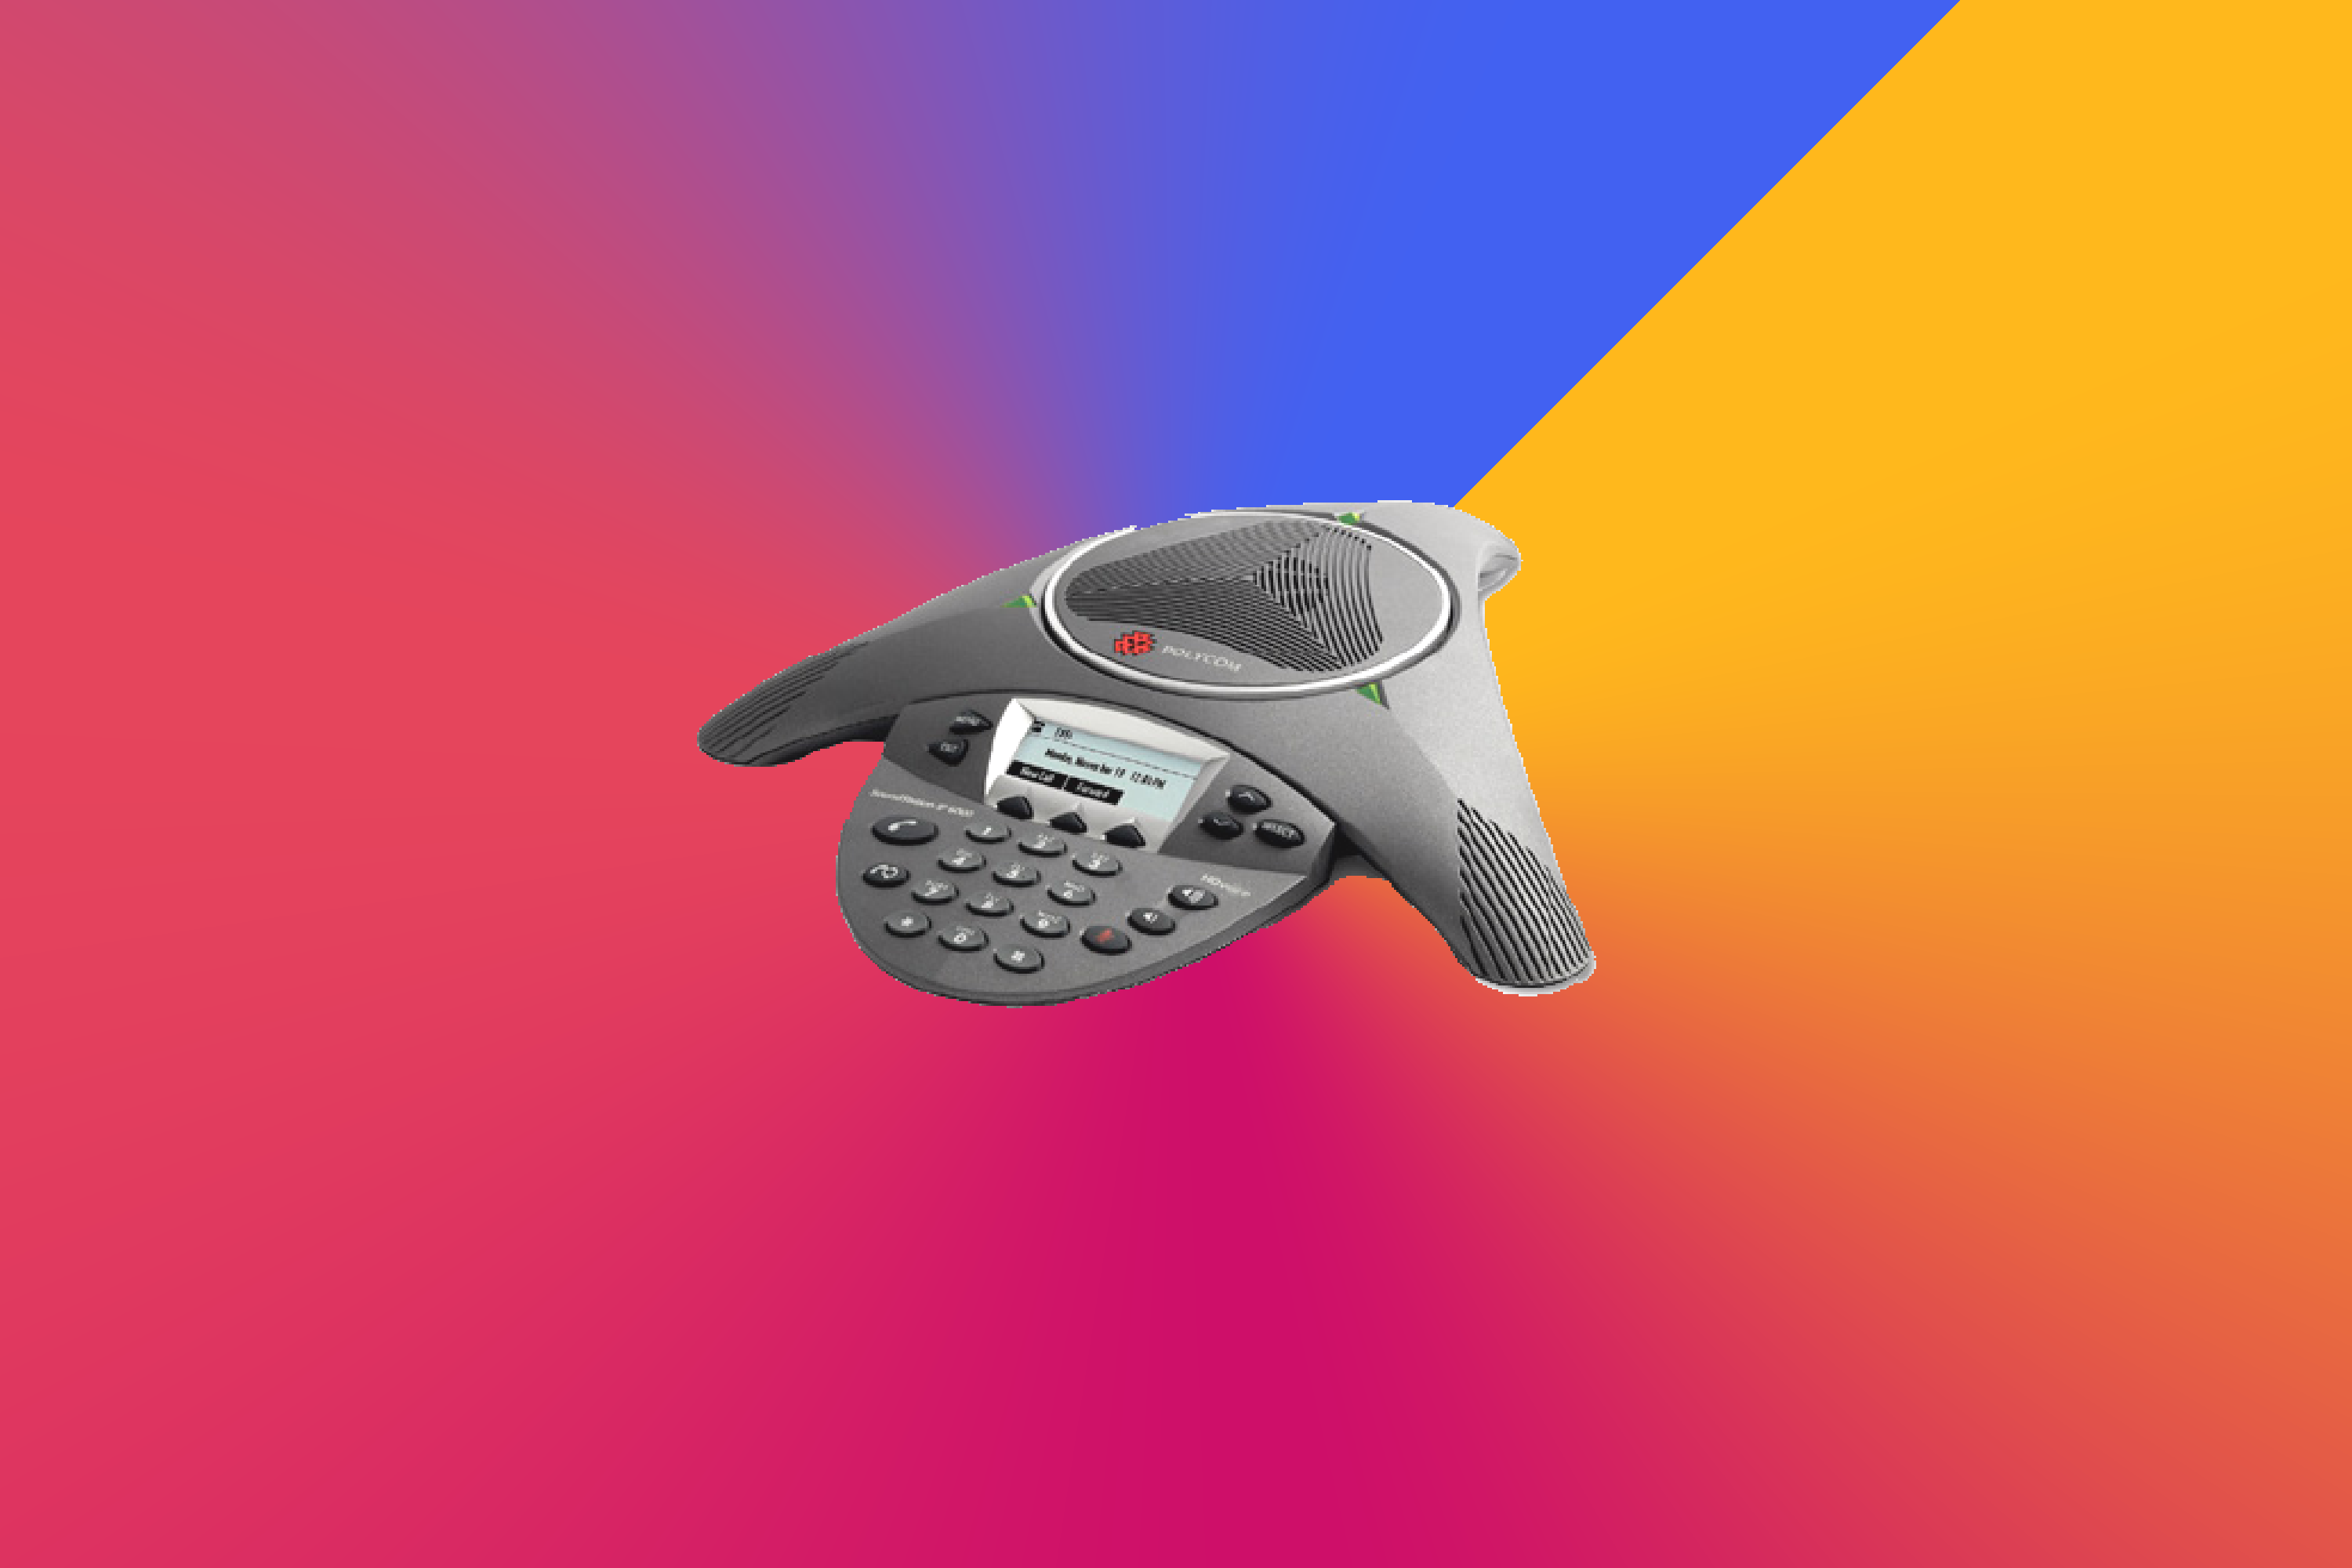 Image of a Poly Soundstation 6000 VoIP conference phone with a colorful background